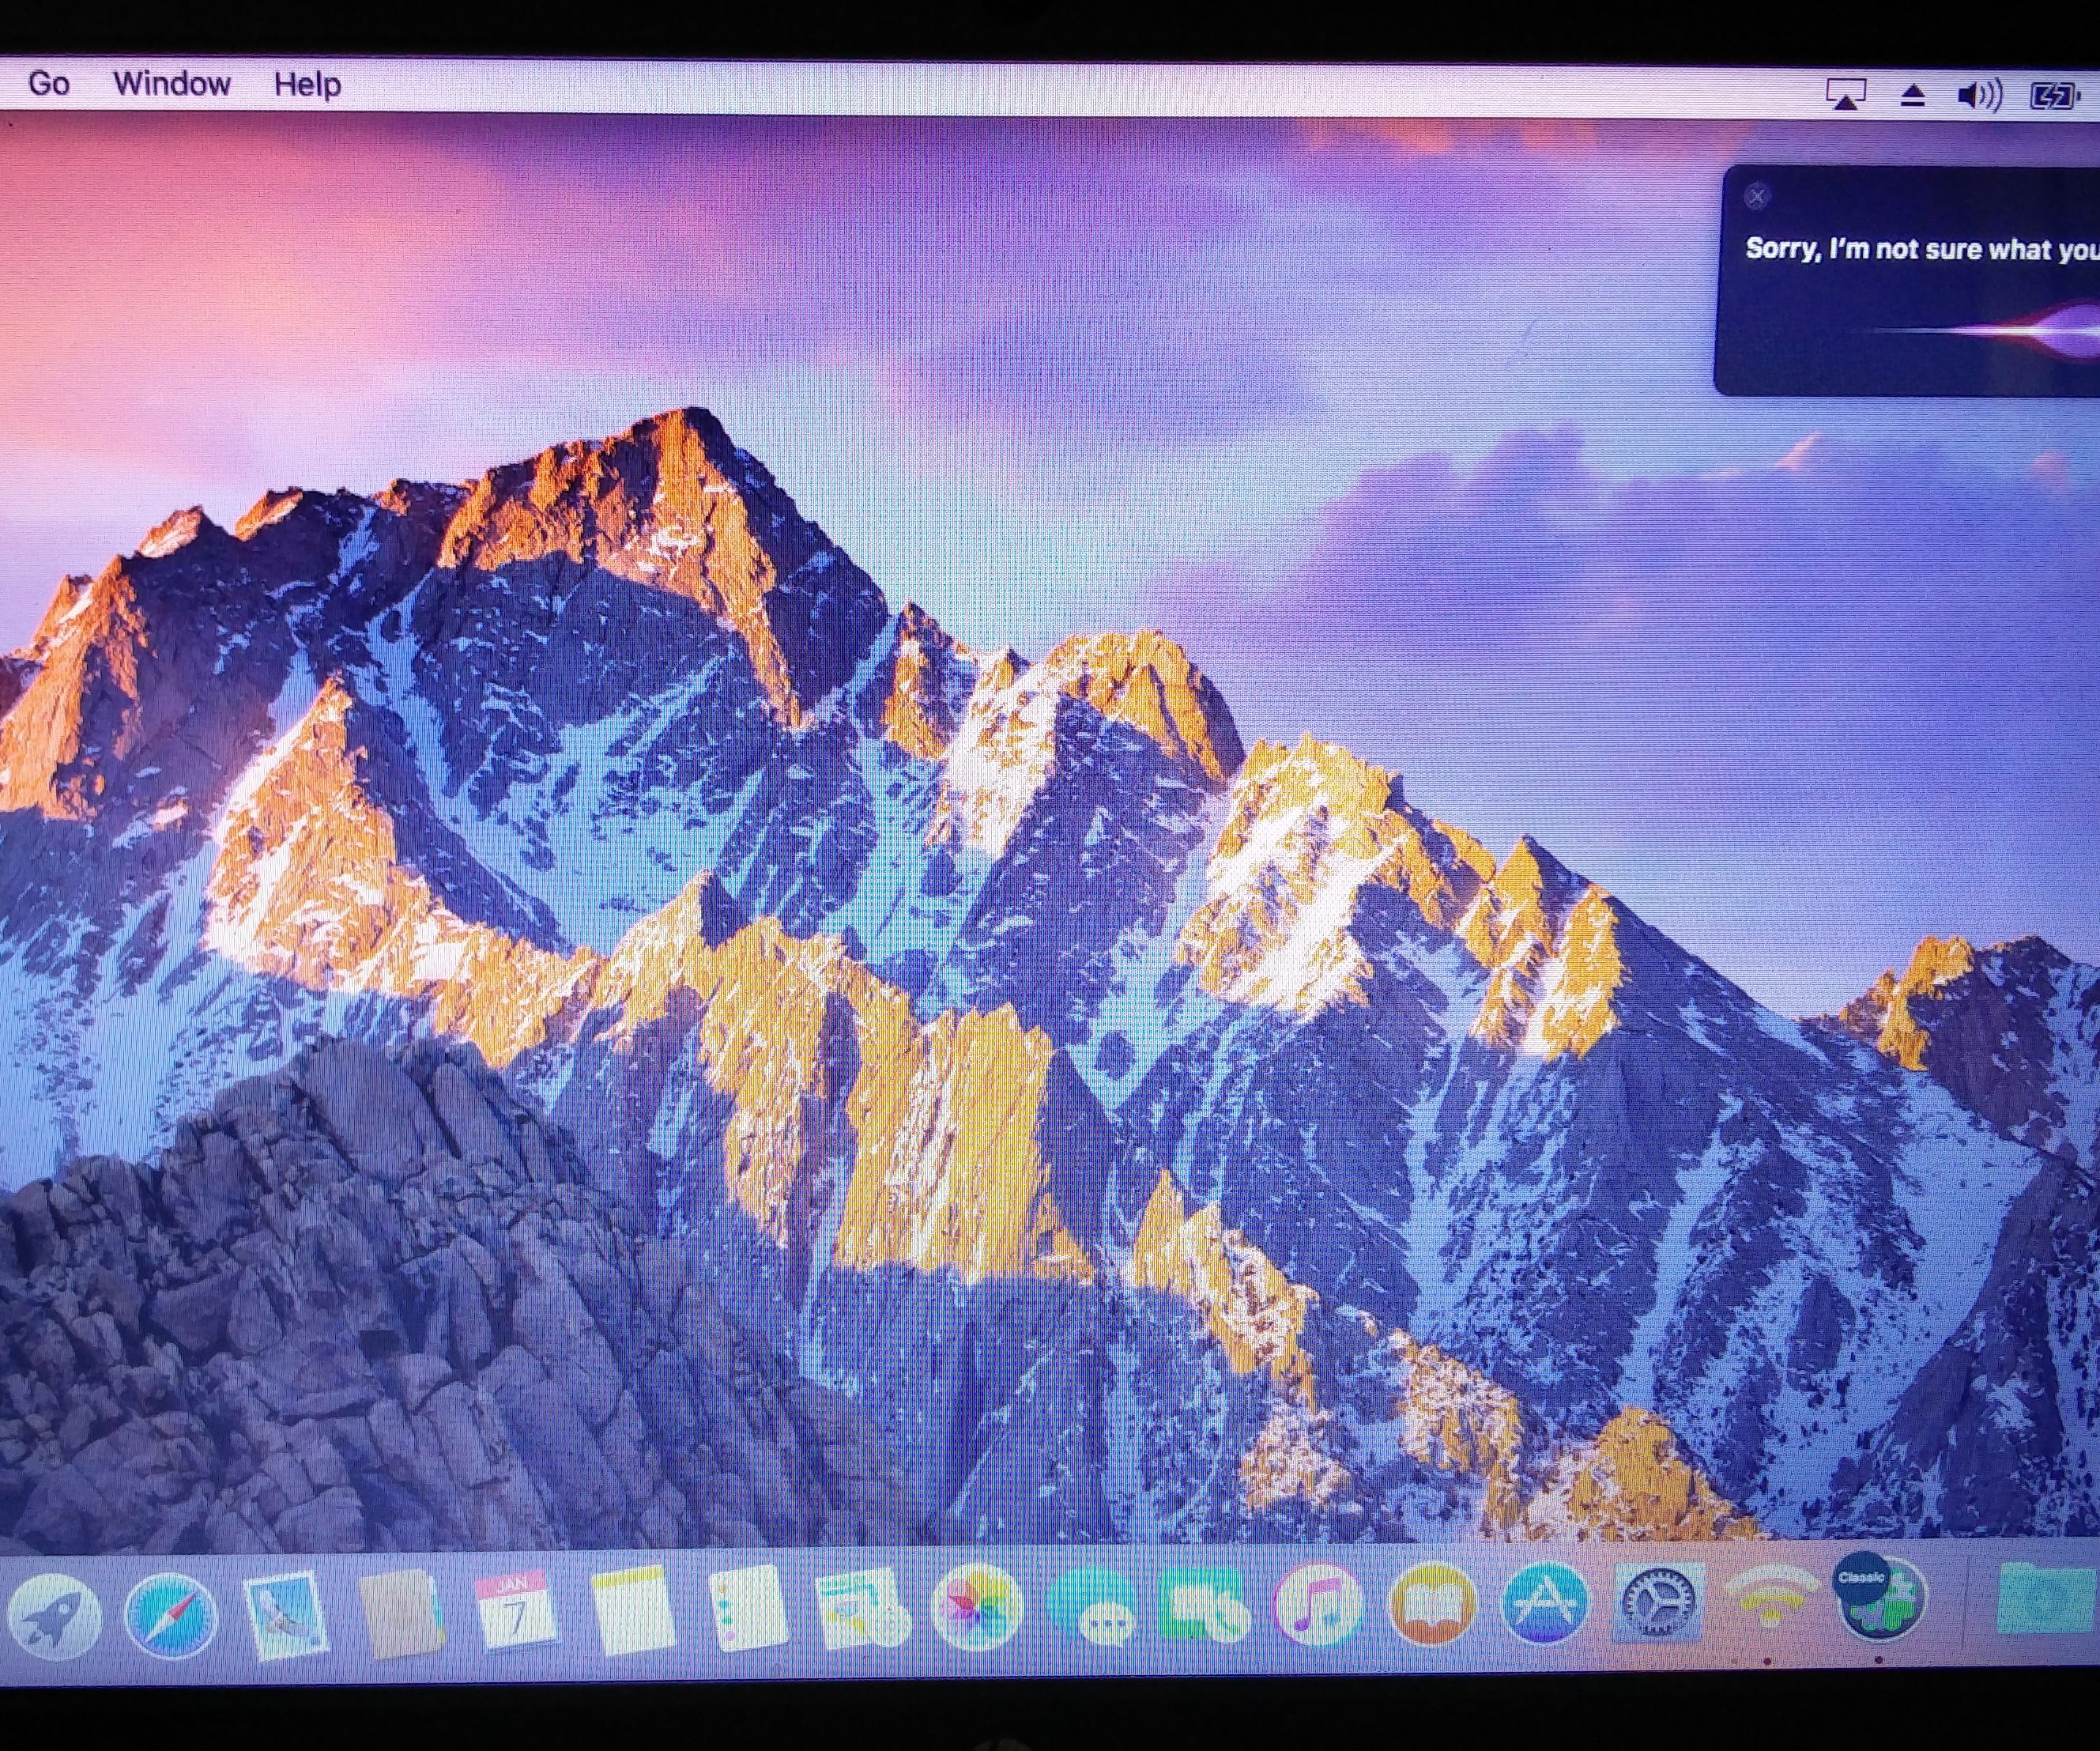 how to upgrade mac os x lion to high sierra